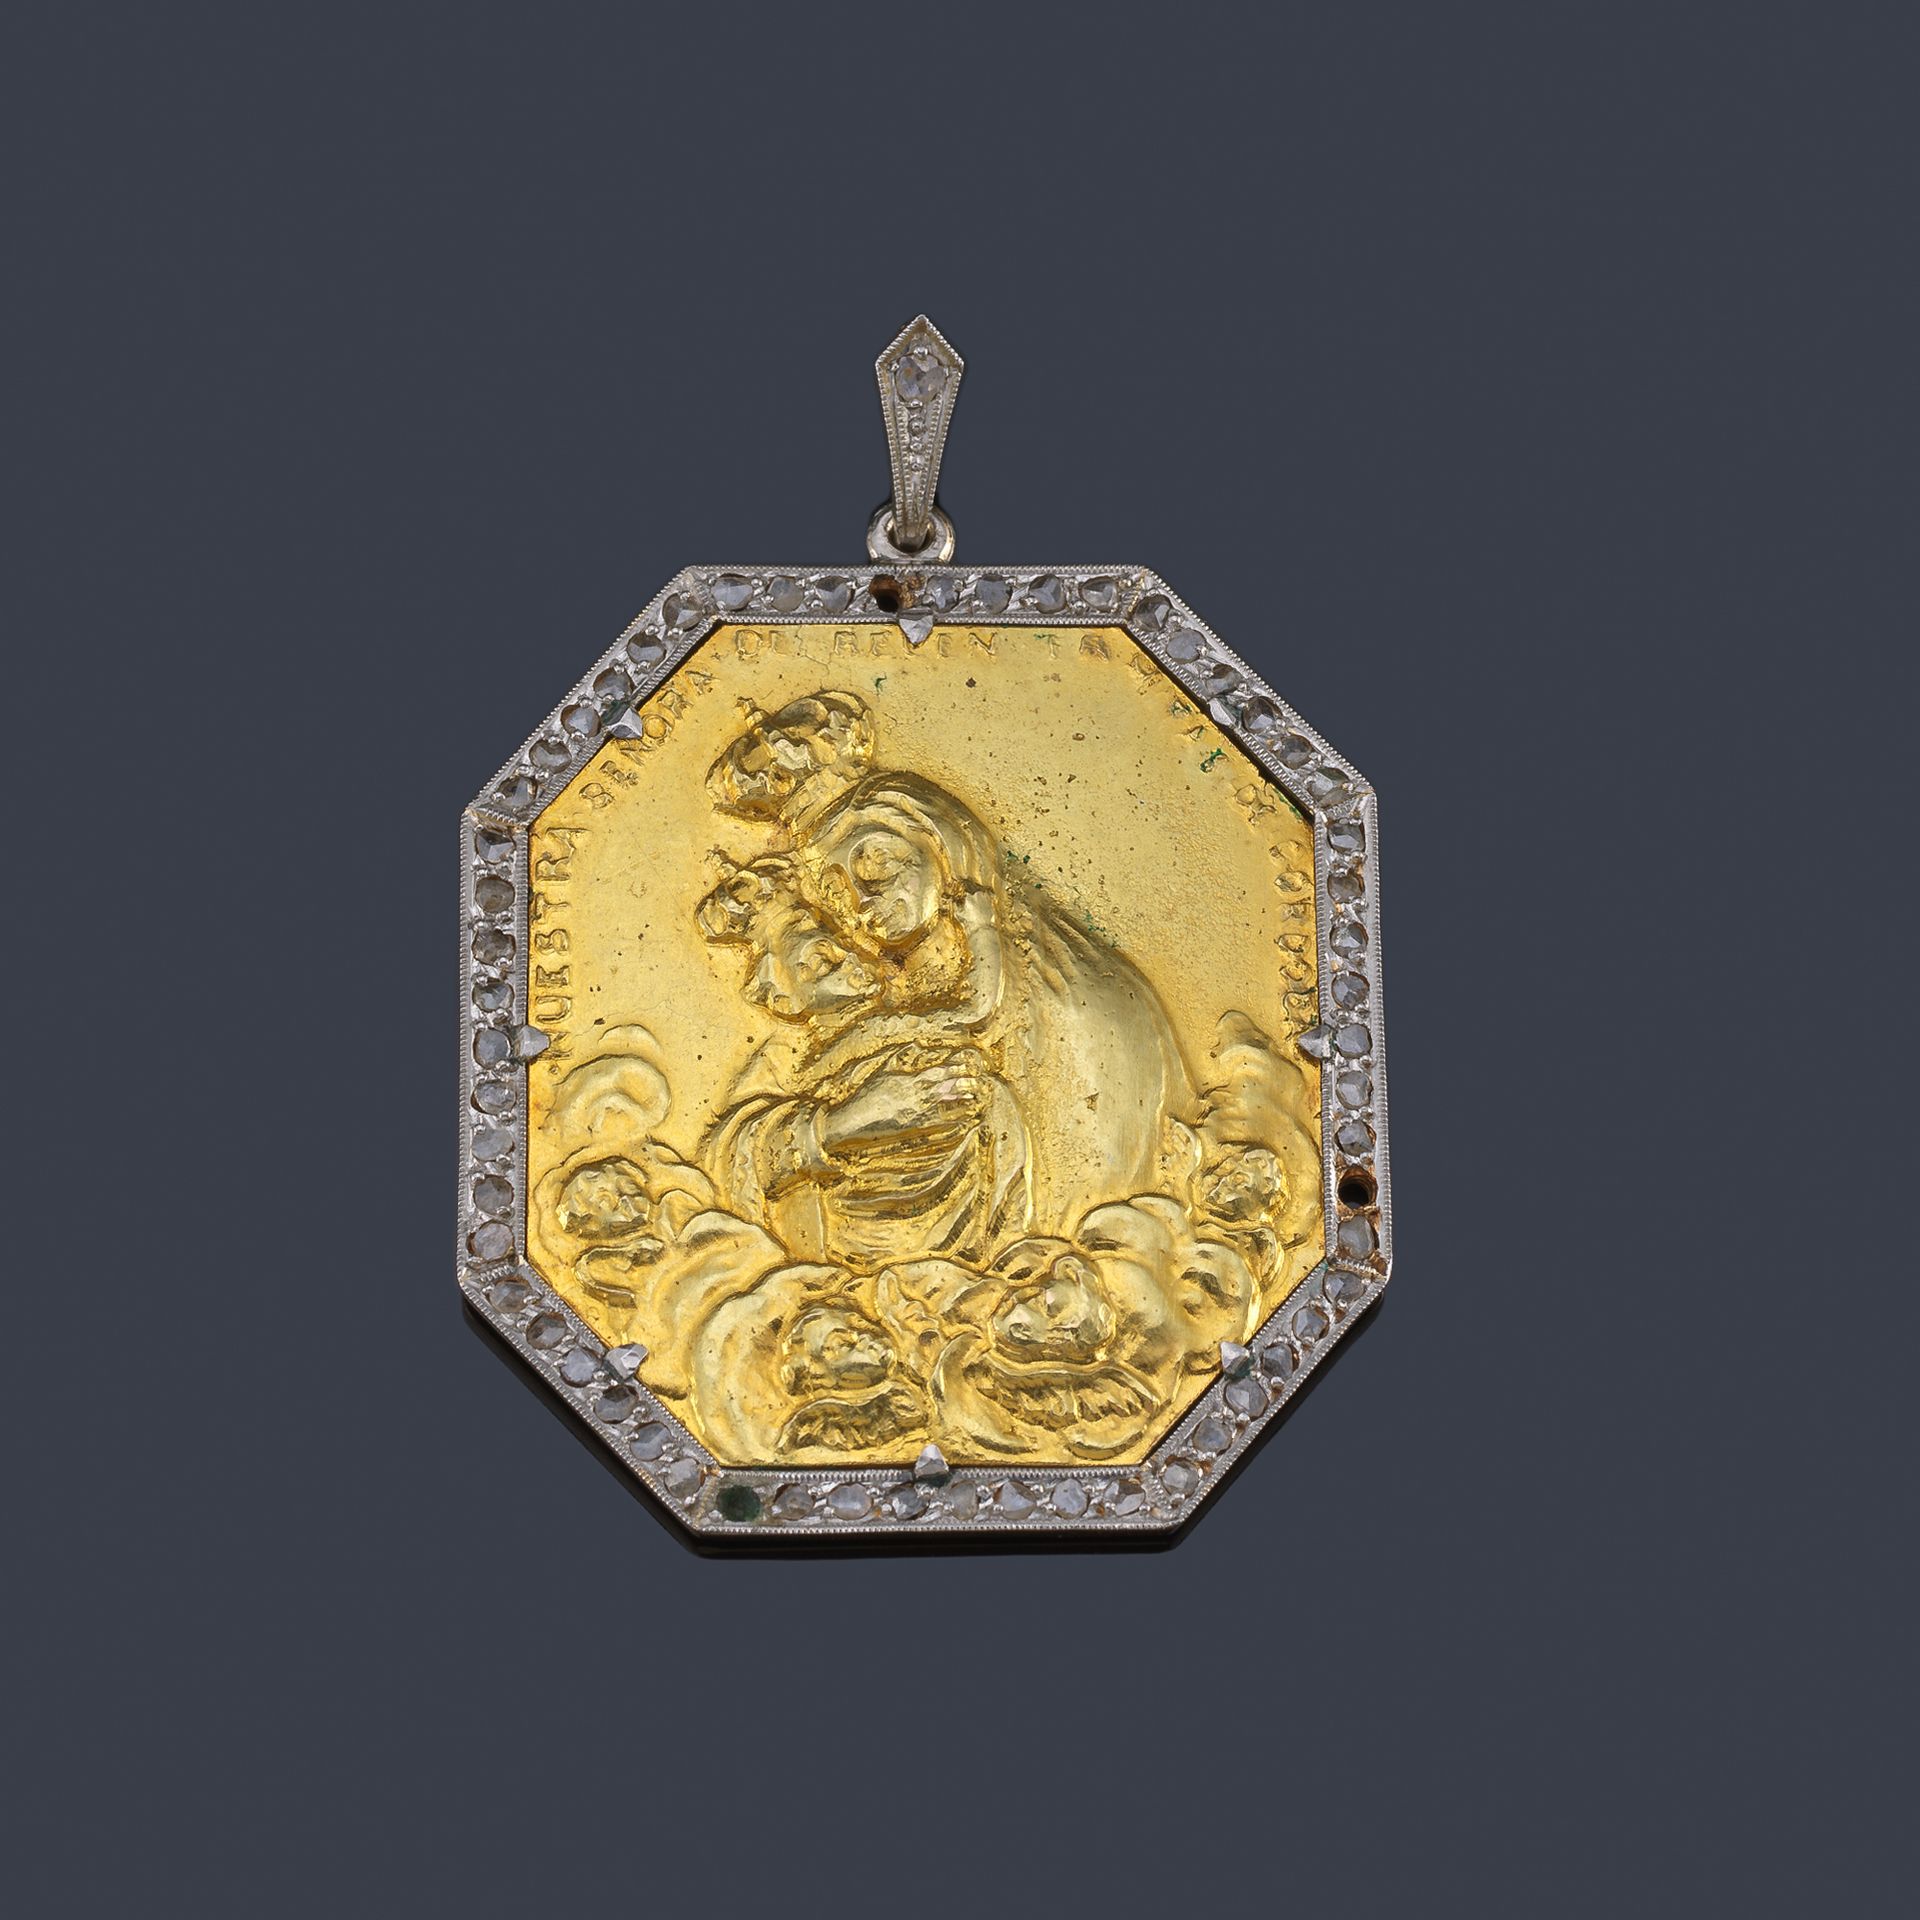 Devotional medal with the Image of Our Lady of Bethlehem and on the reverse the &hellip;